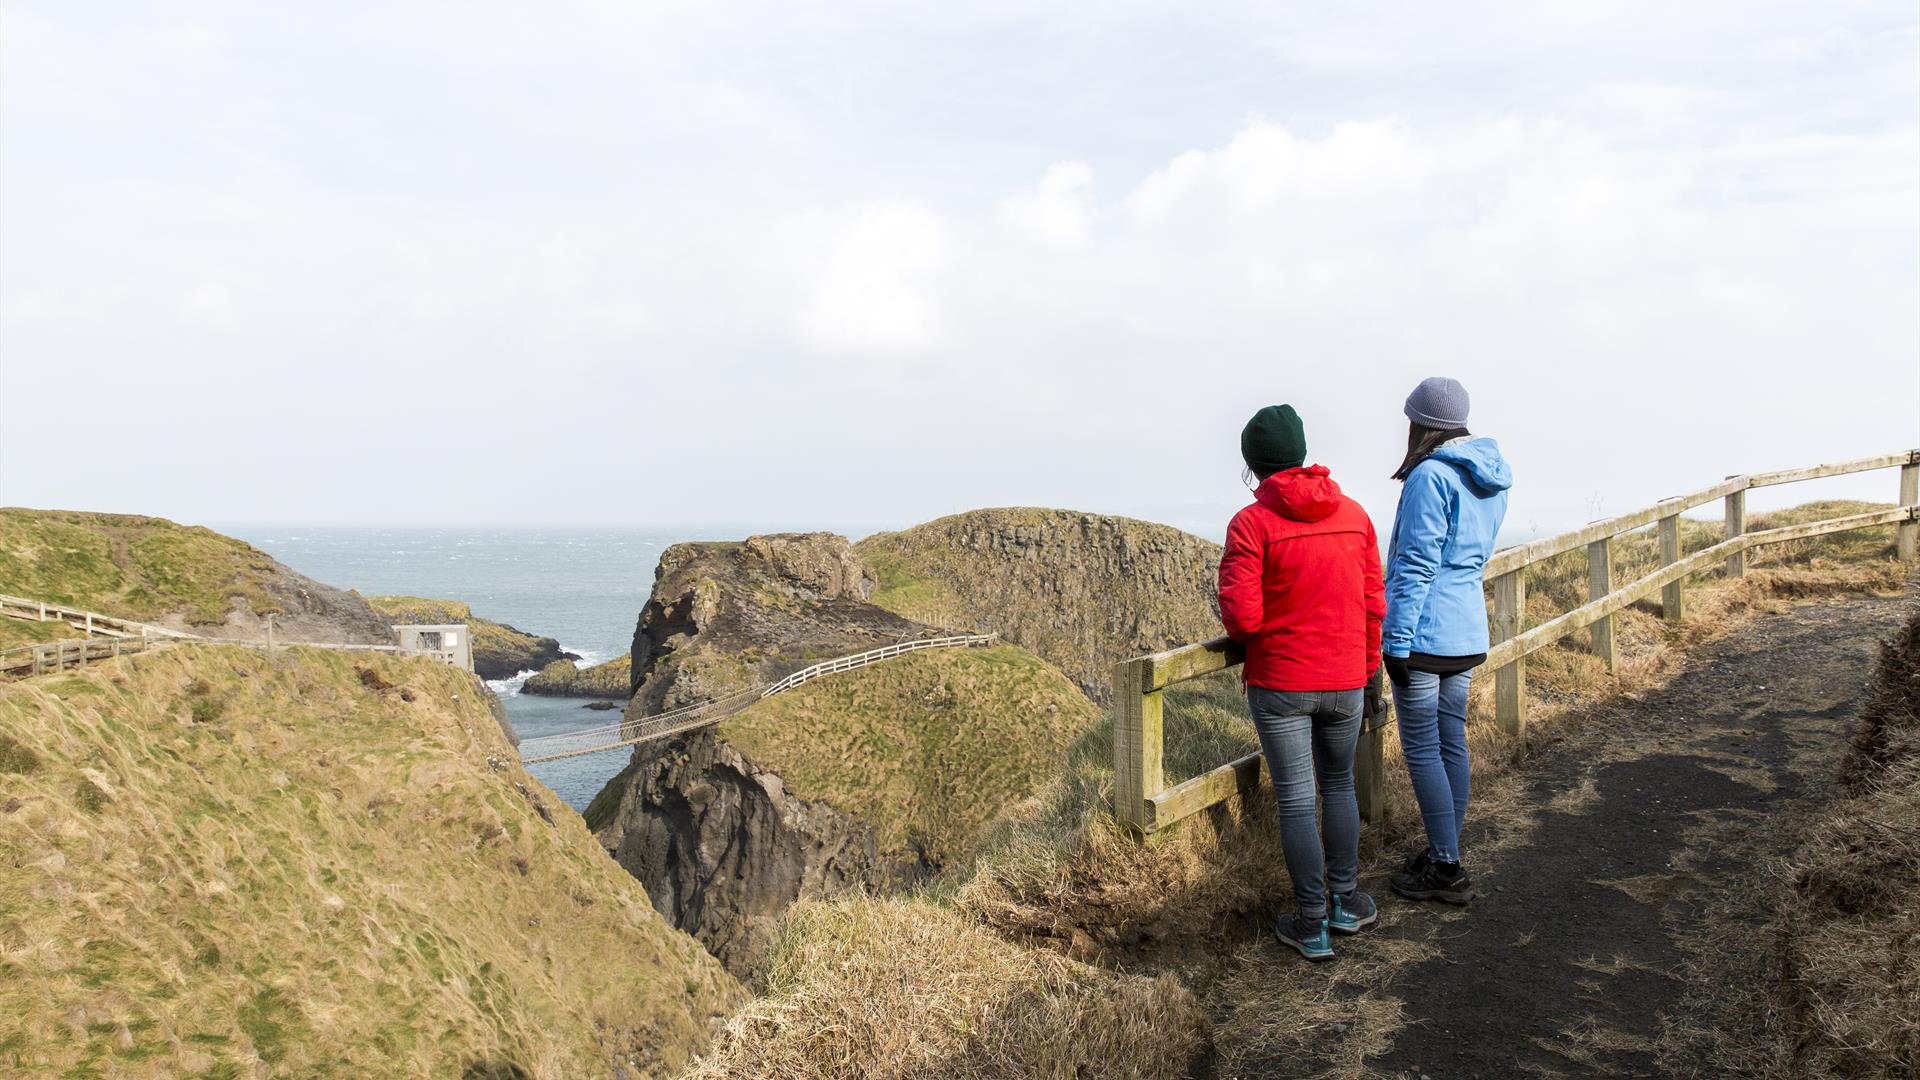 Two visitors admiring the views of Carrick-a-Rede Rope Bridge